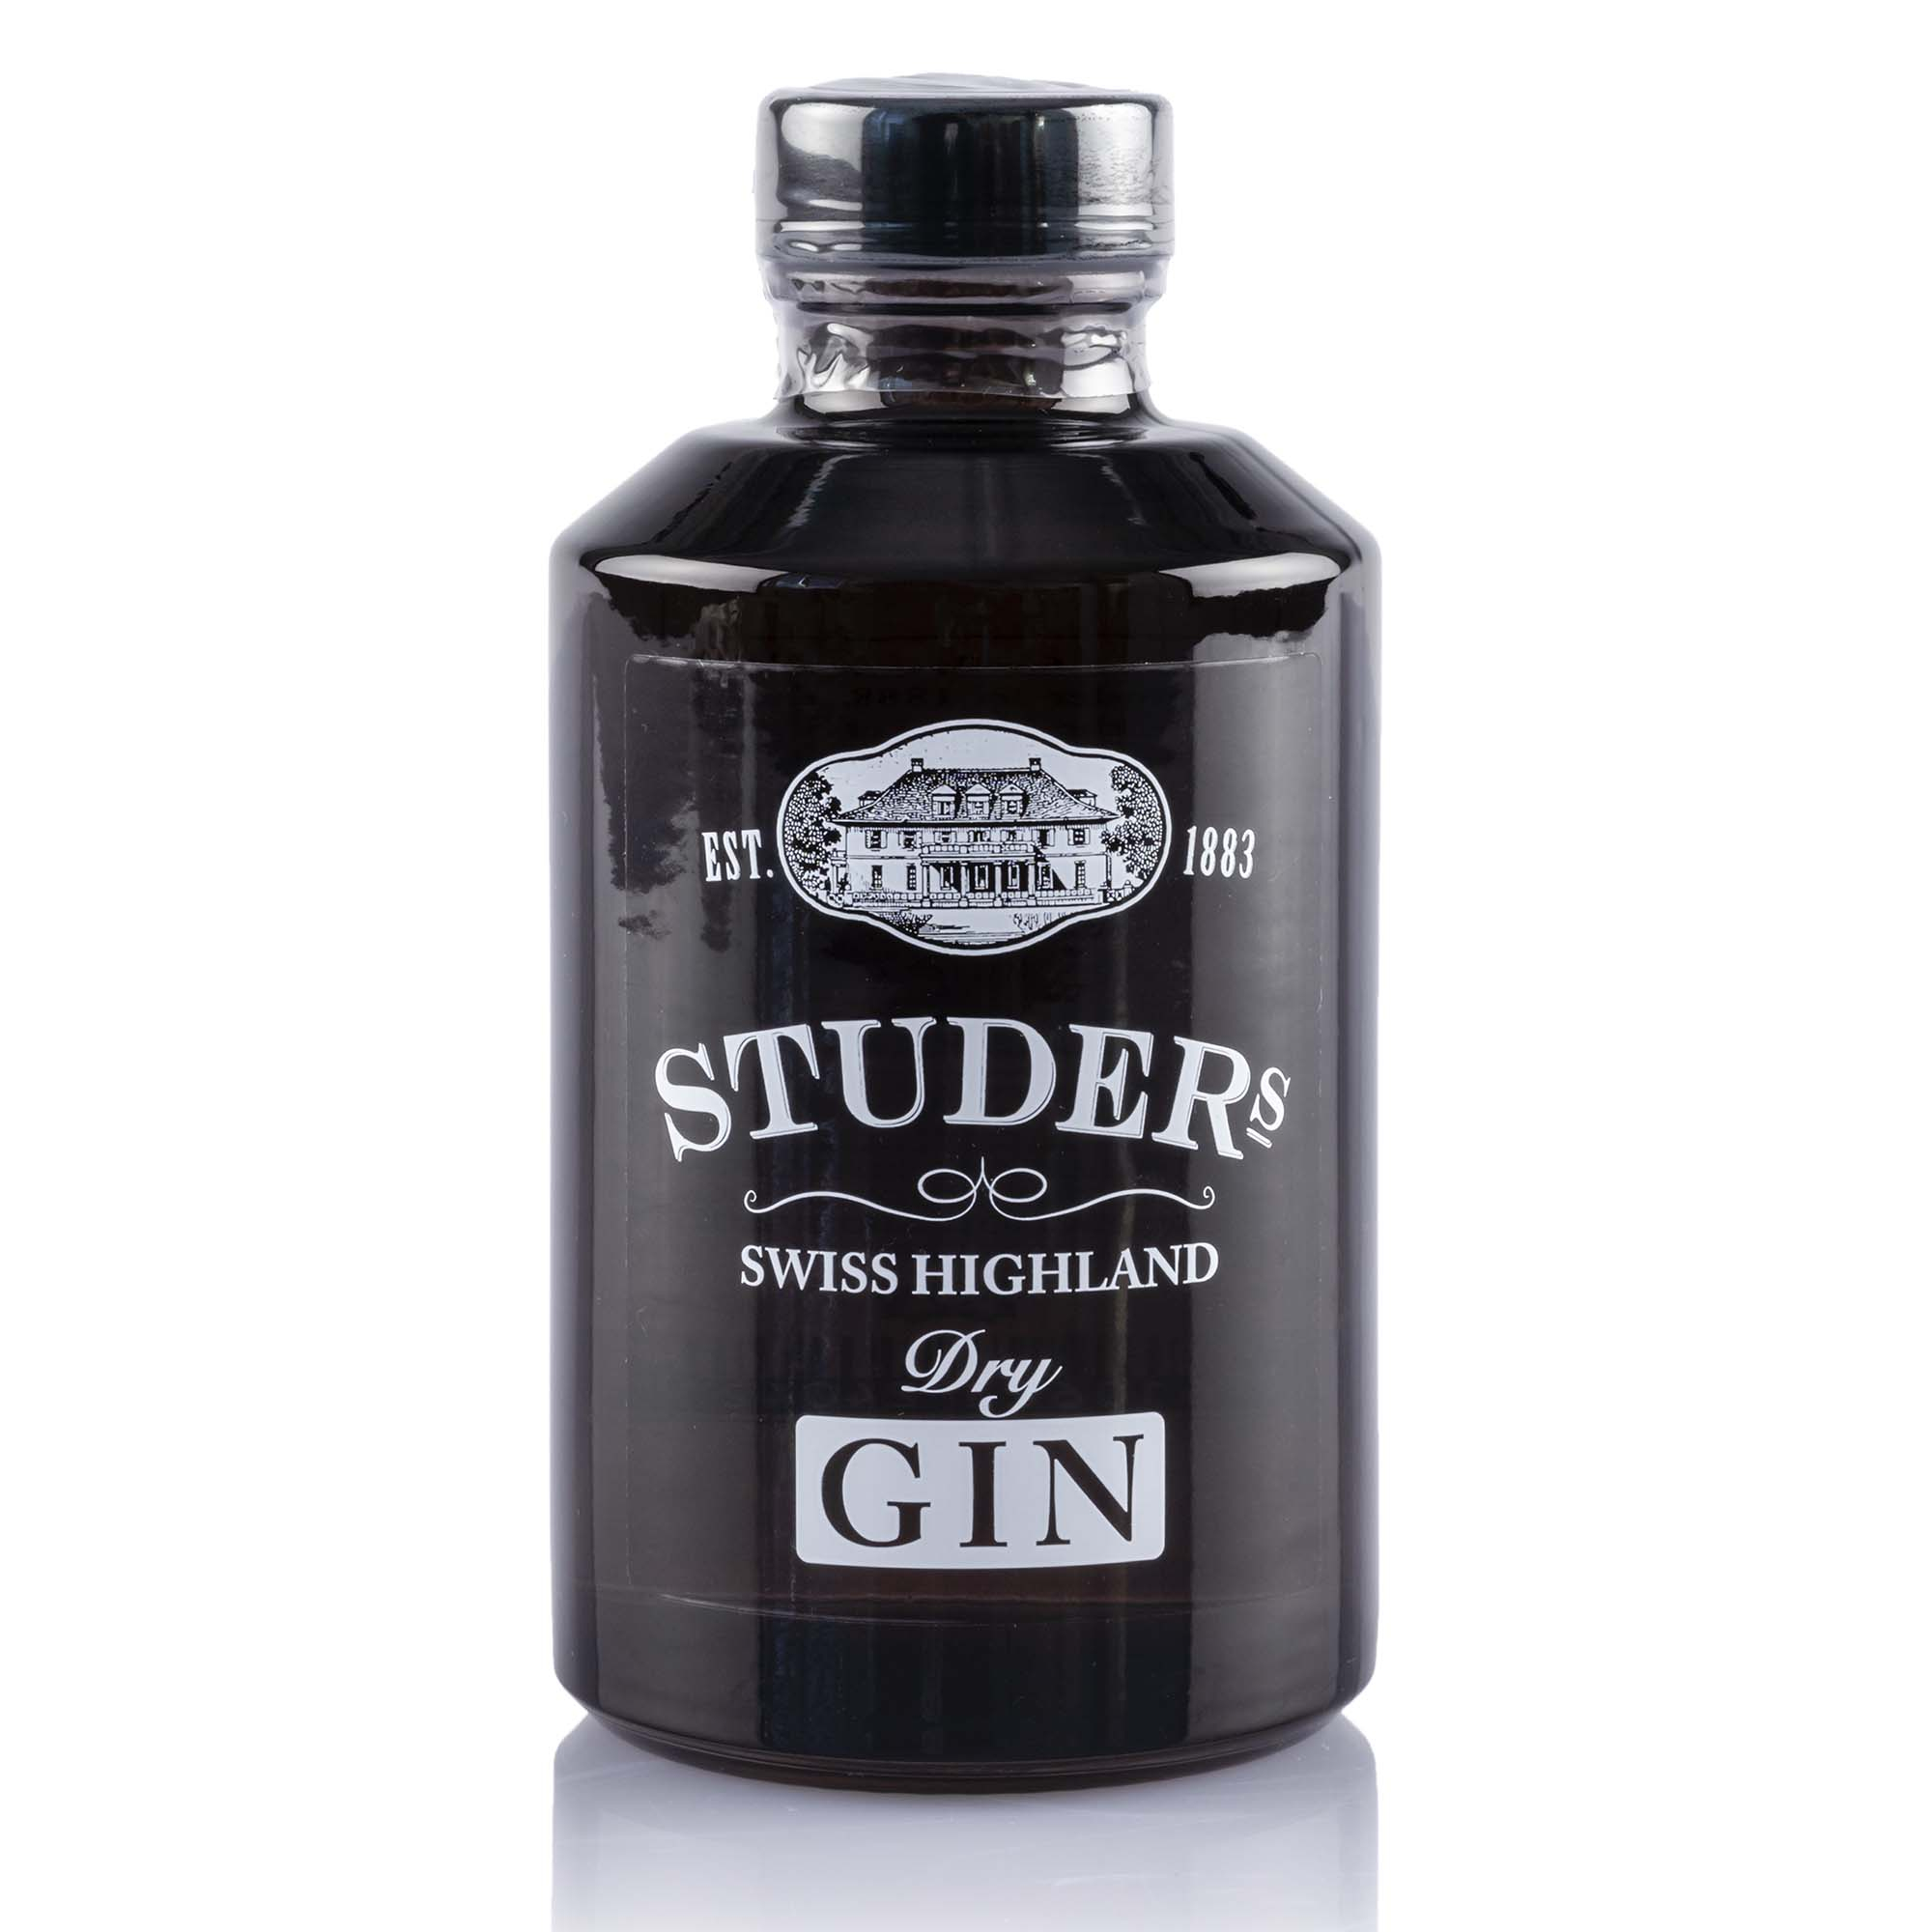 Studer’s Swiss Highland Dry Gin, 20cl, 42.4% Vol.